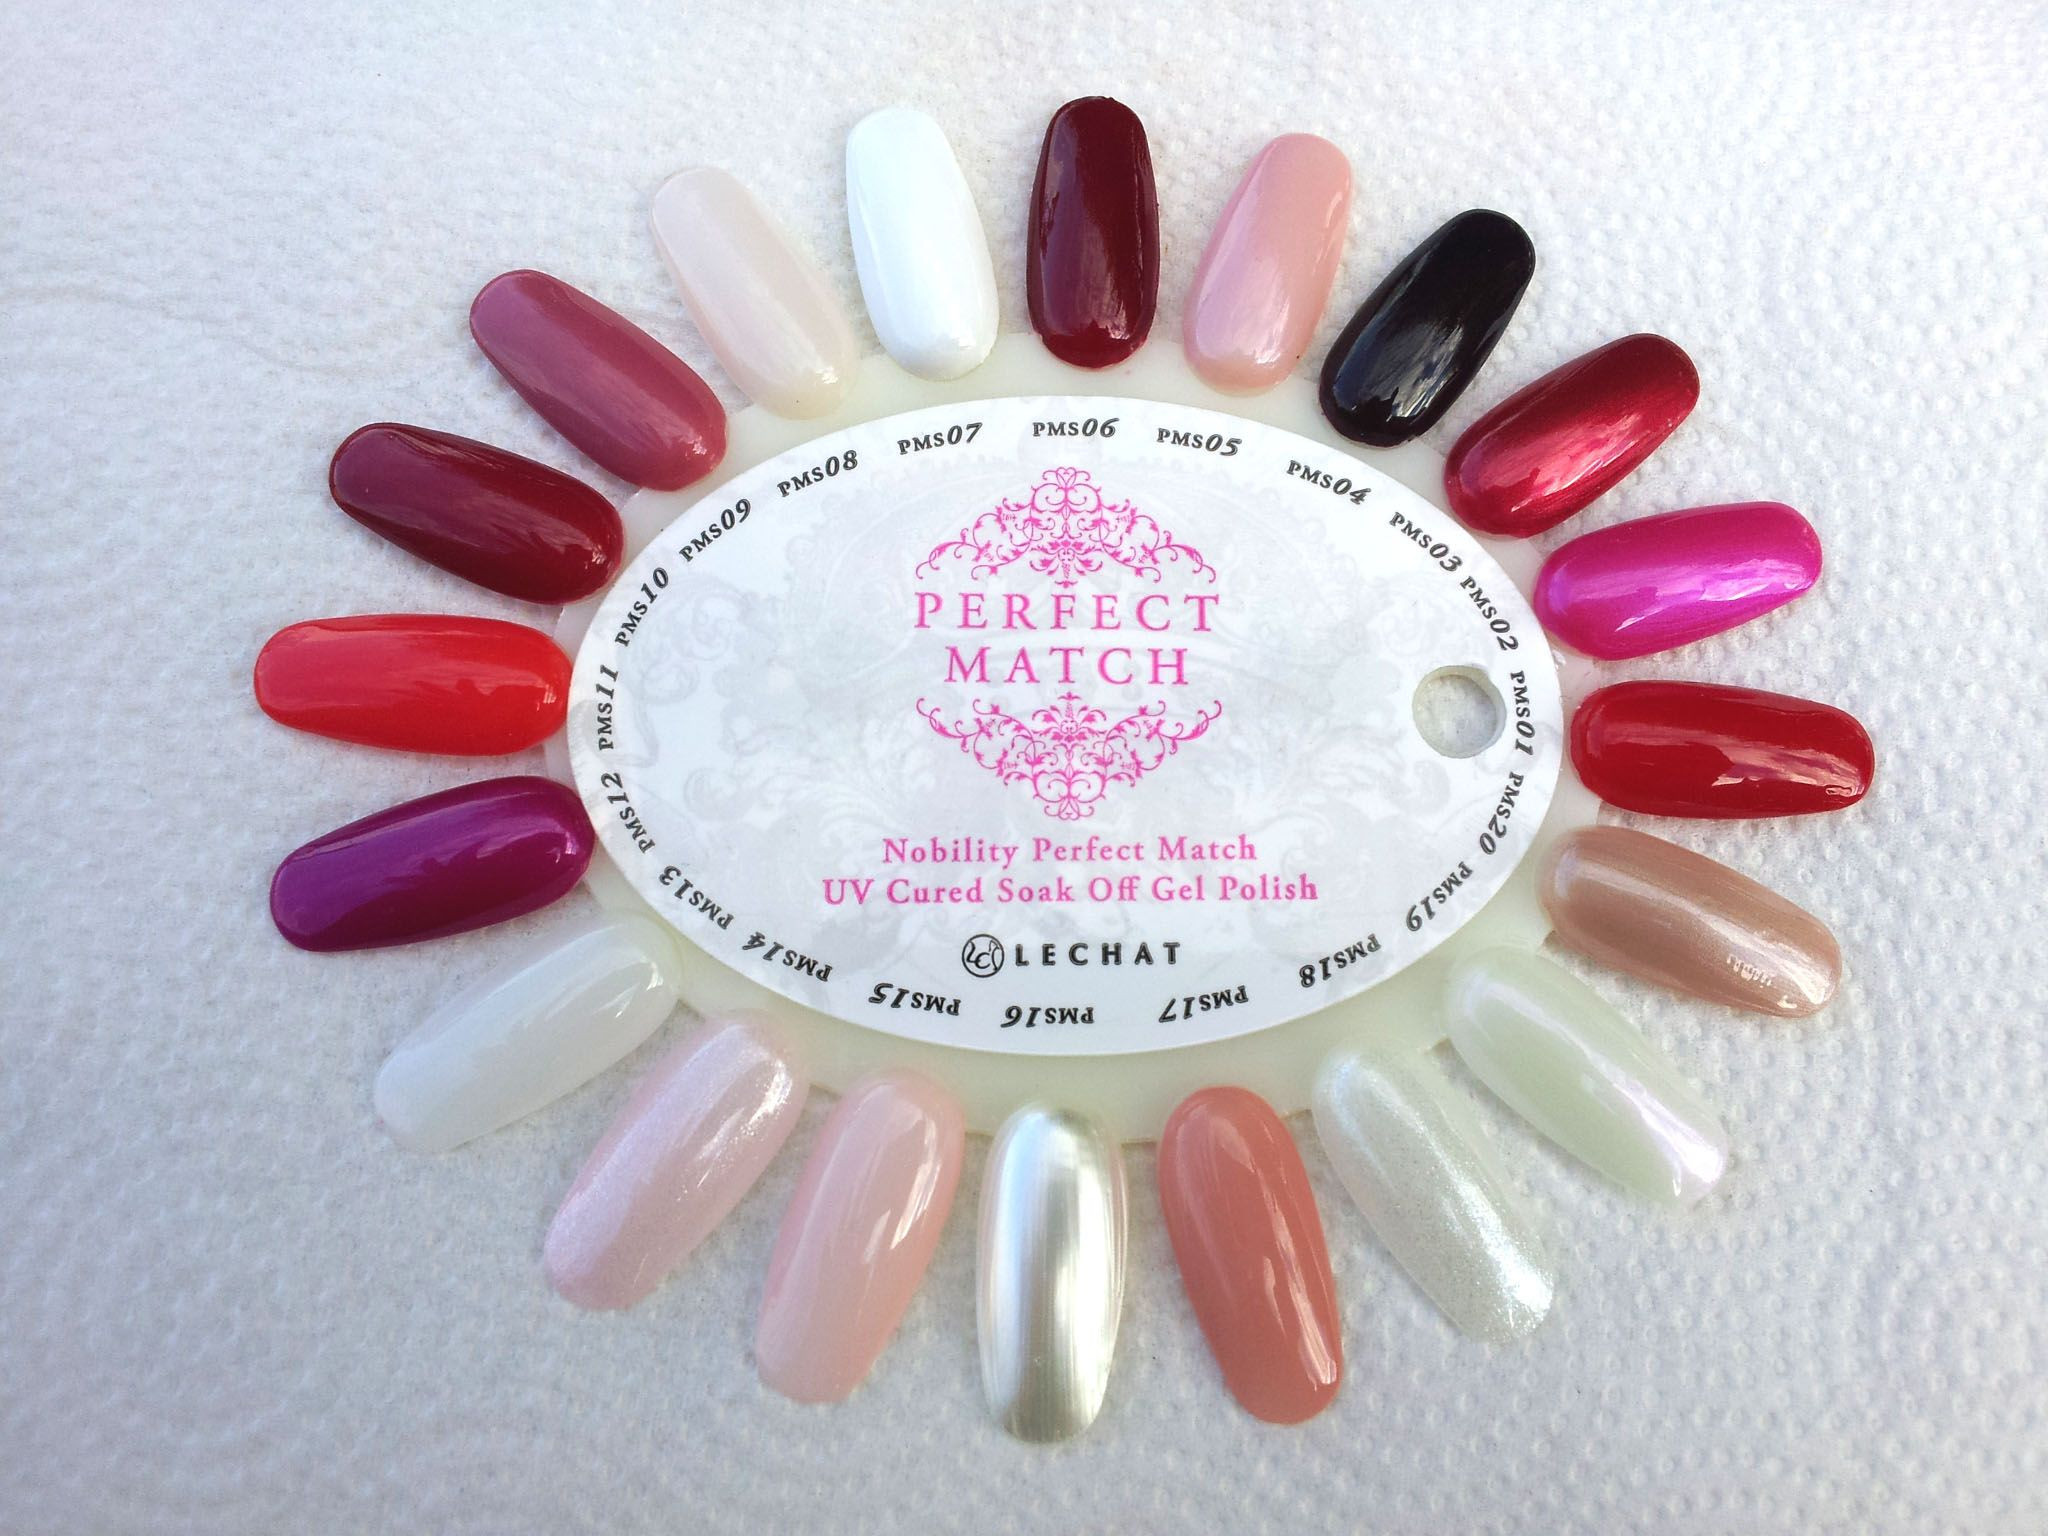 Perfect Match Nail Colors
 LeChat Perfect Match Original 20 shades swatch